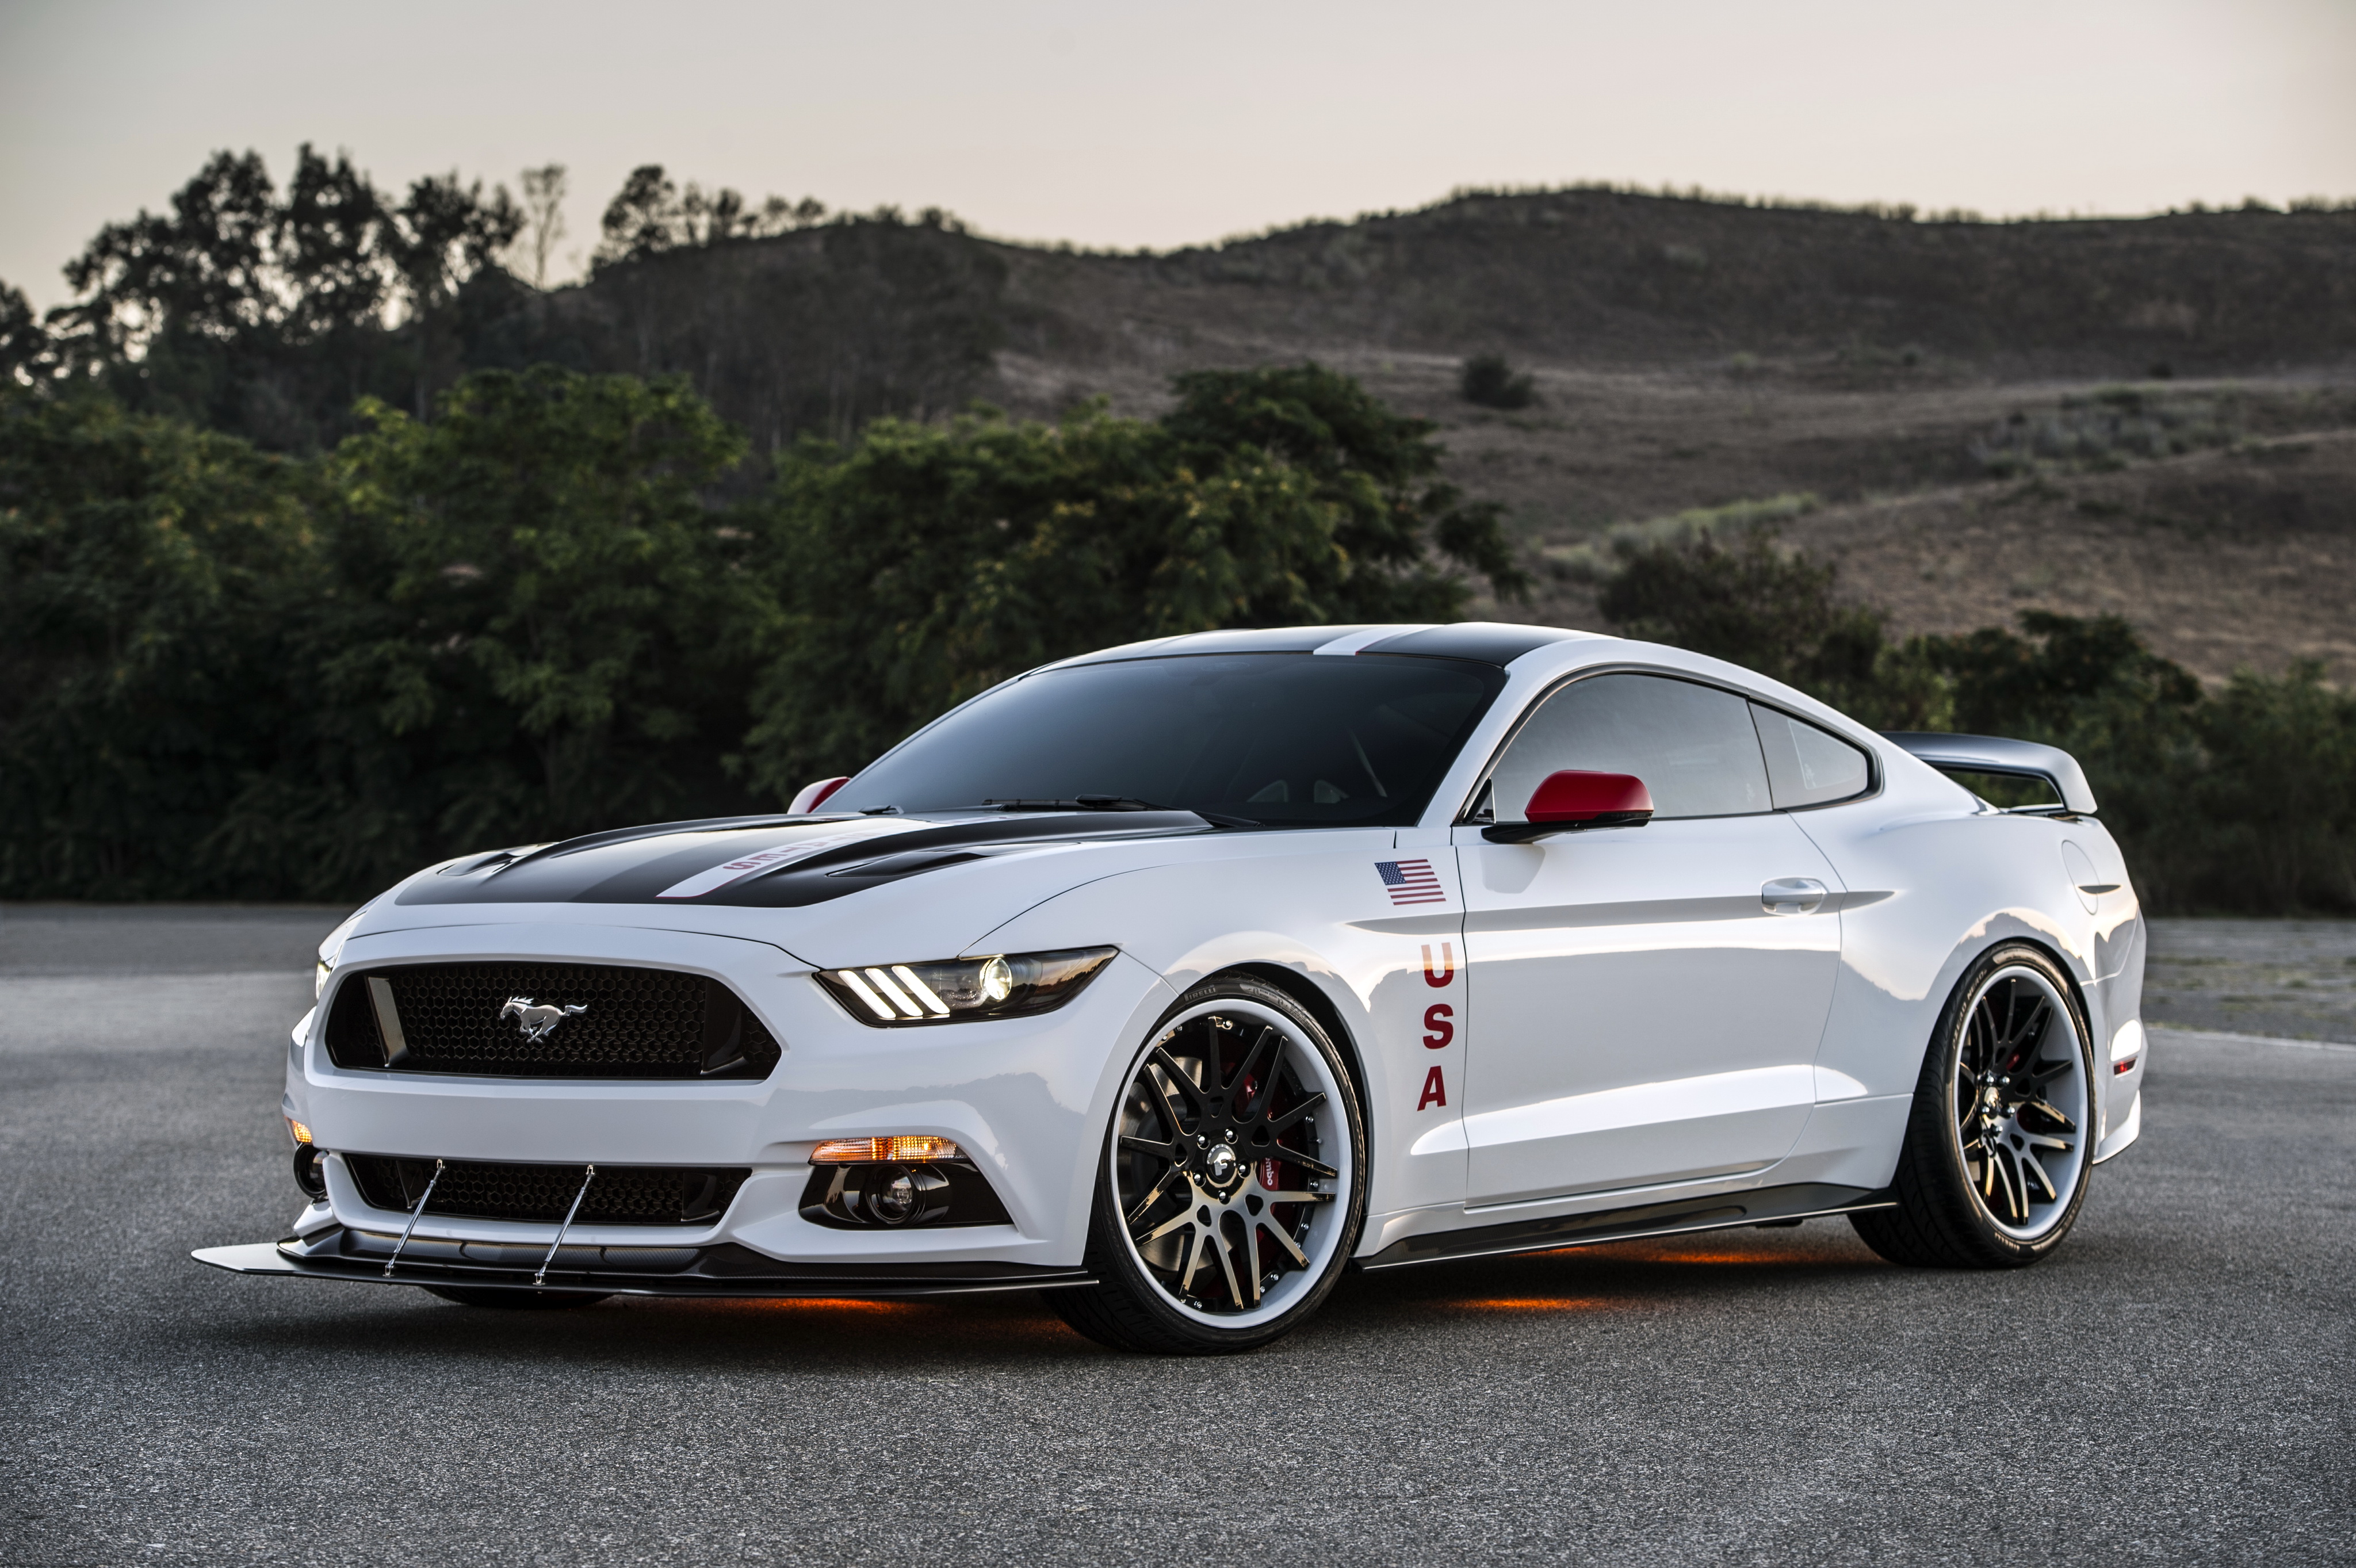 Tuned Ford Mustang in white